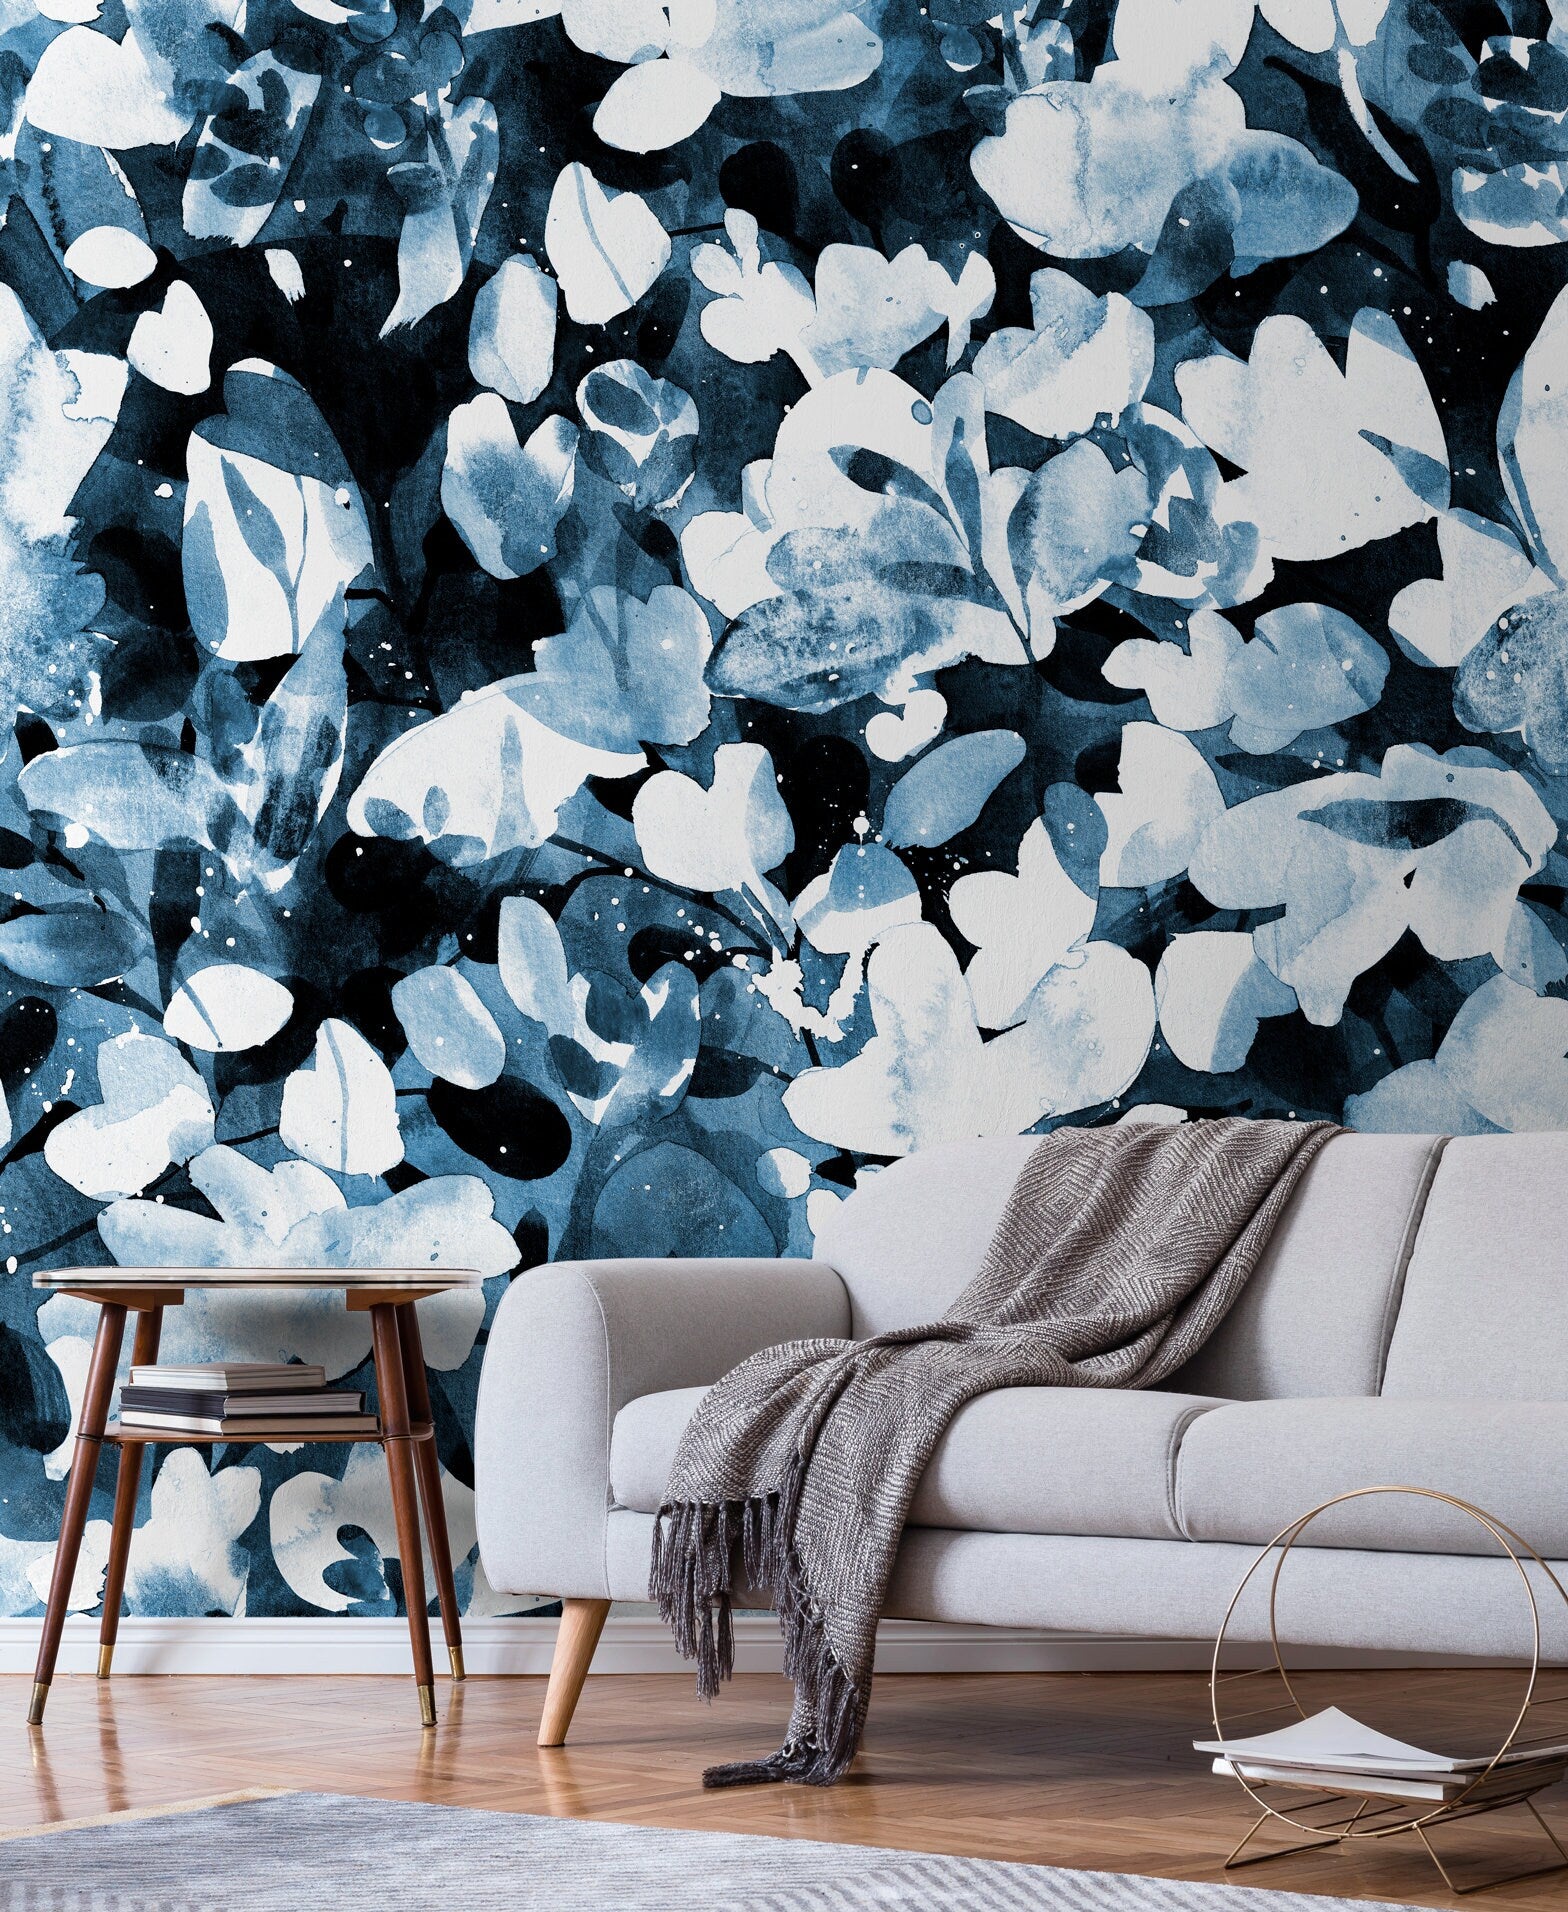 Wallpaper Peel and Stick Wallpaper Removable Wallpaper Home Decor Wall Art Wall Decor Room Decor / Navy Blue Leaves Wallpaper - X148